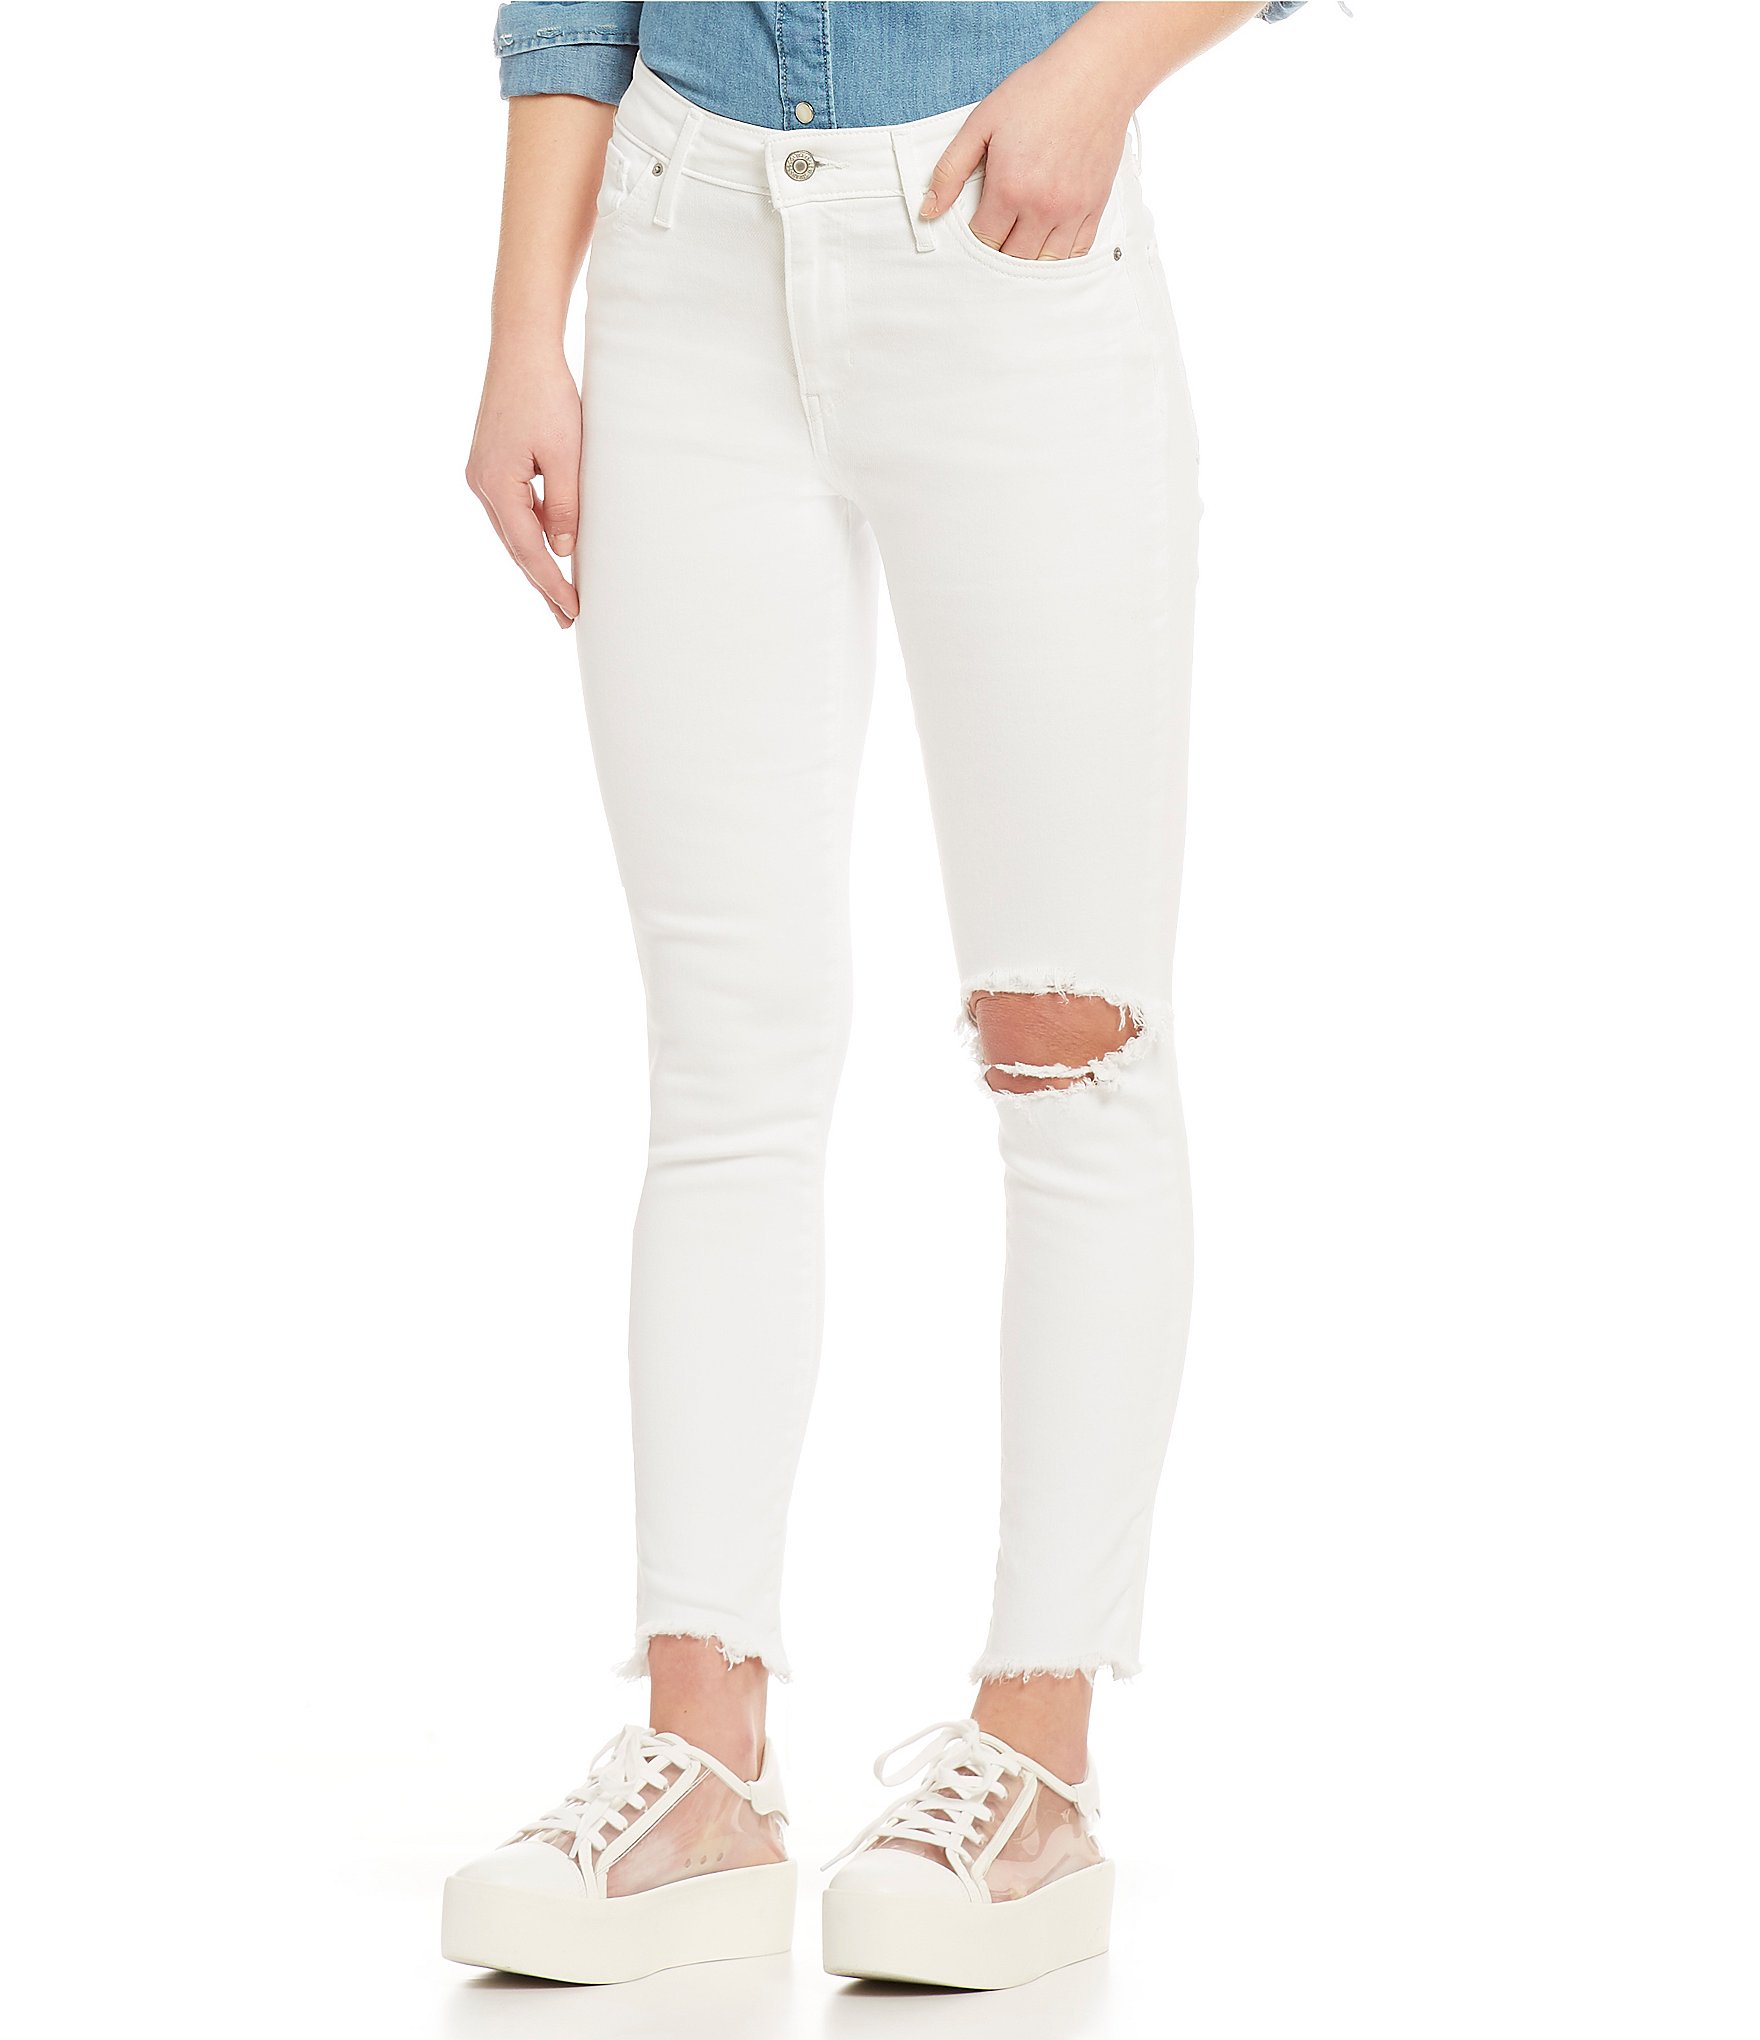 Levi's® 721 White High Rise Destructed Frayed Ankle Skinny Jeans | Dillard's